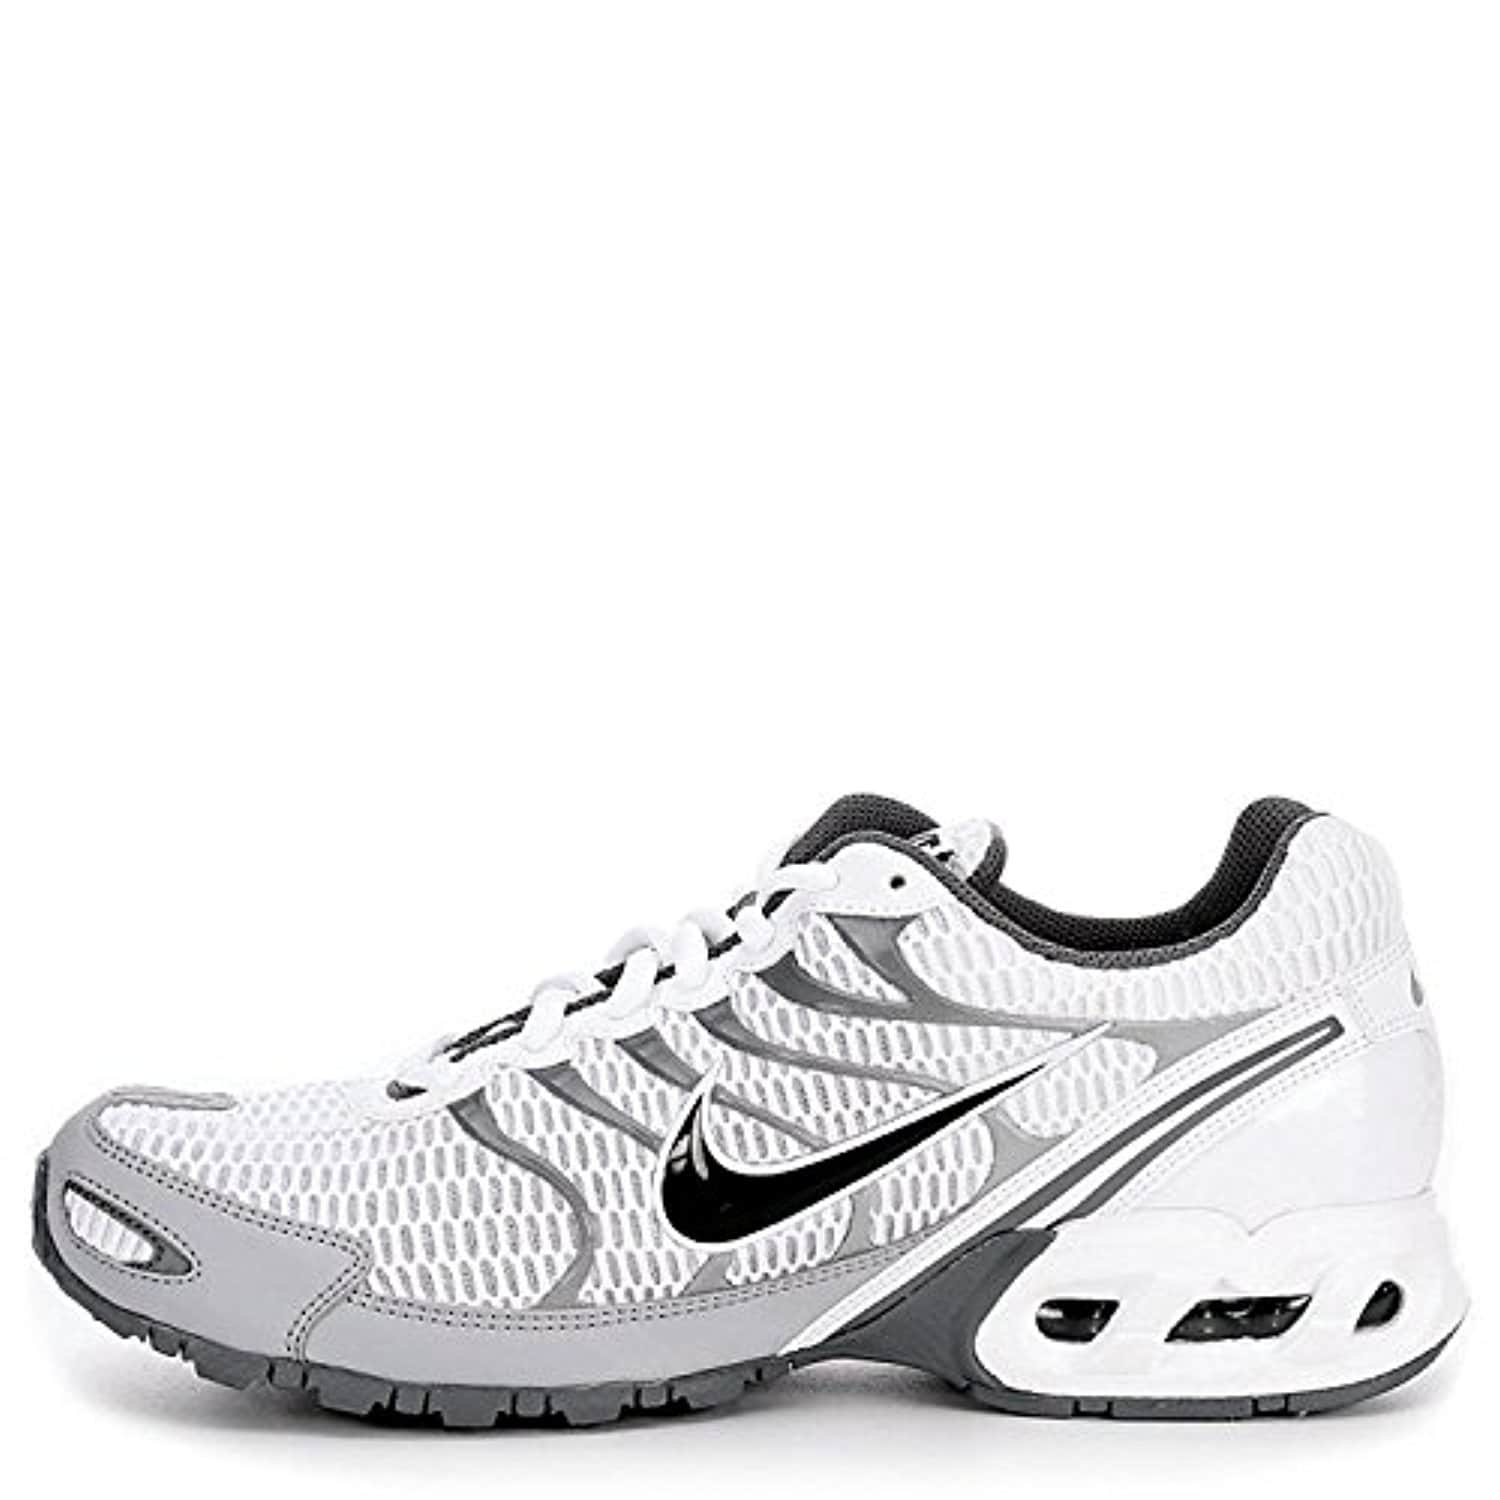 nike max torch 4